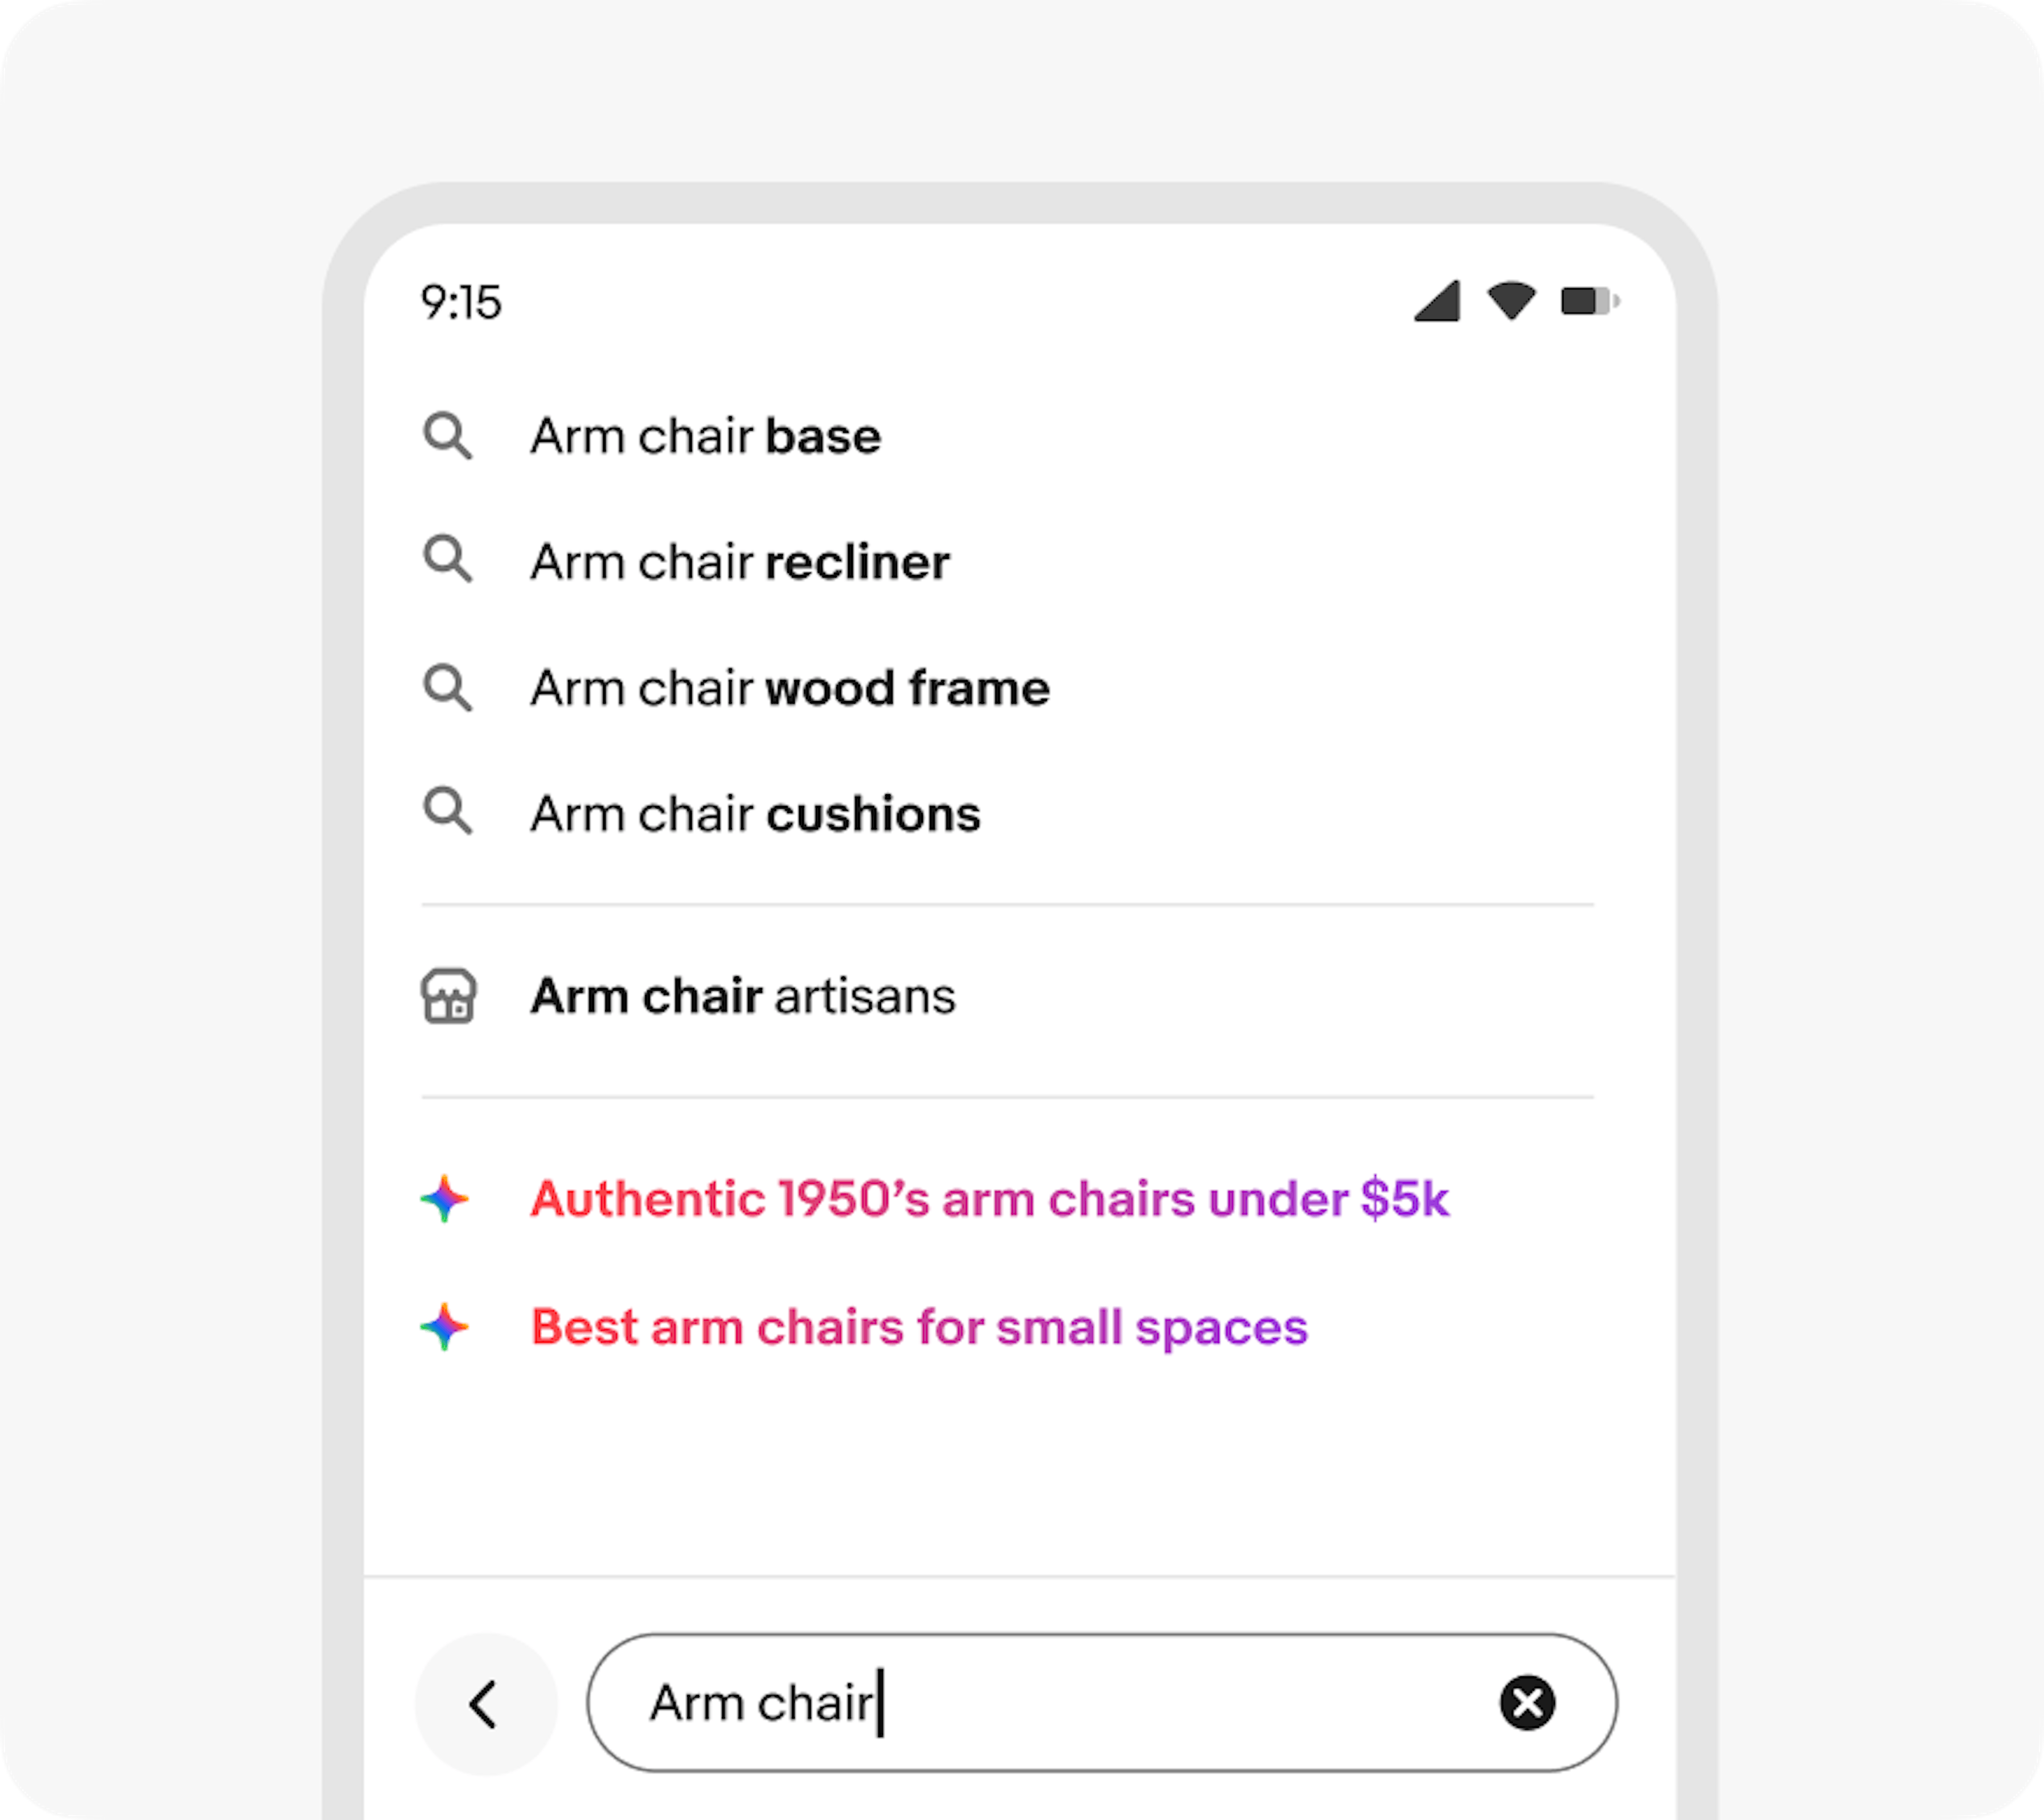 “Don’t” example showing a search screen with the query “Arm chair” typed in to the search field. Multiple suggestions are stacked in black text with gray icons in front of them. The last 2 suggestions have the full spectrum AI icon in front of them and the text also has a gradient applied.